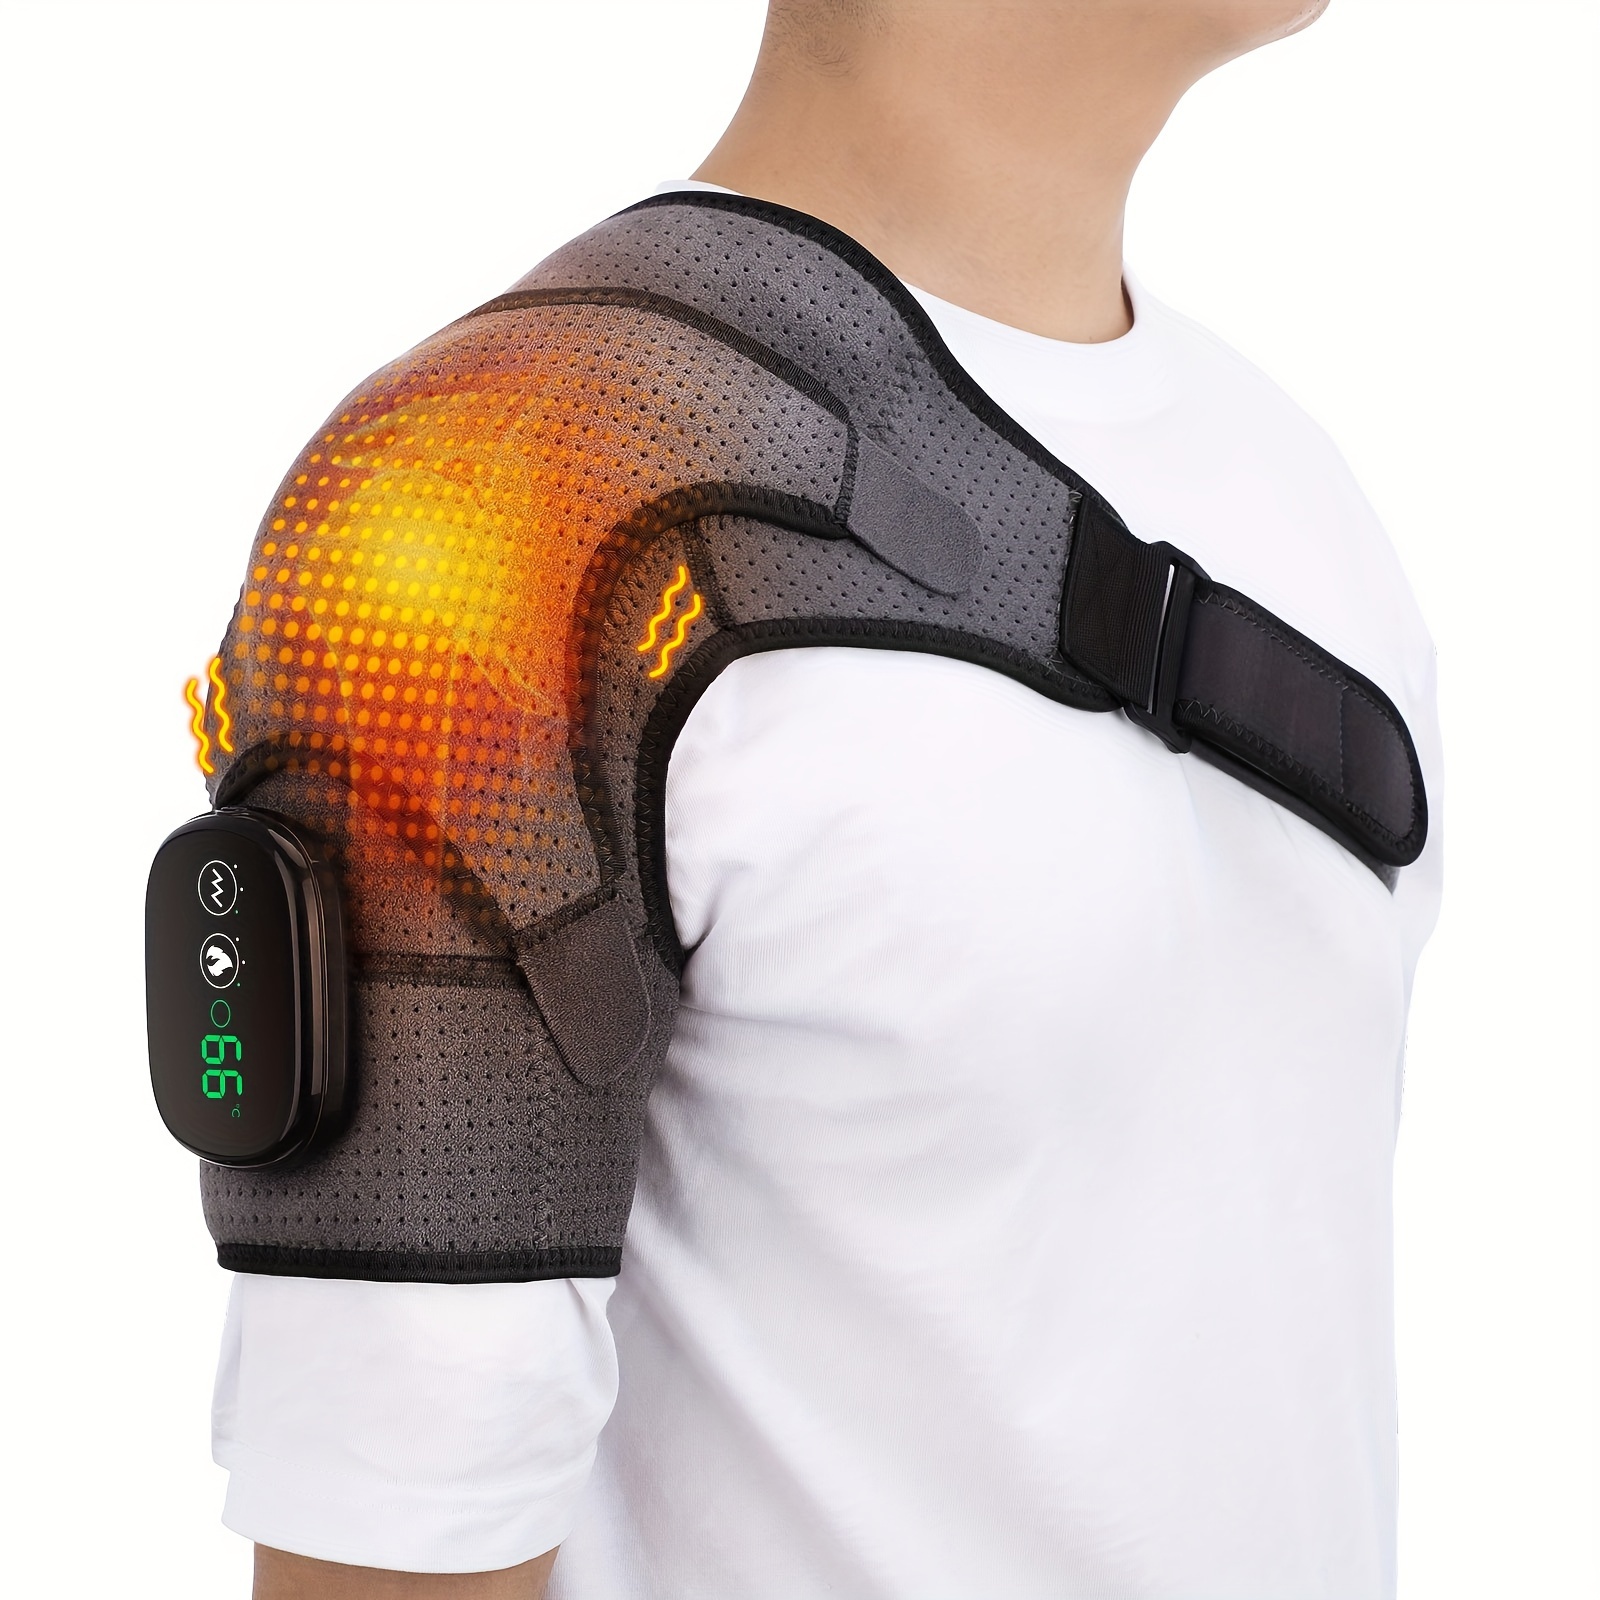 Heated Shoulder Wrap Brace,Portable Electric 3 Heating Setting Wireless Pad  Strap, Relax Muscle Pain Relief Shoulder Compression Sleeve